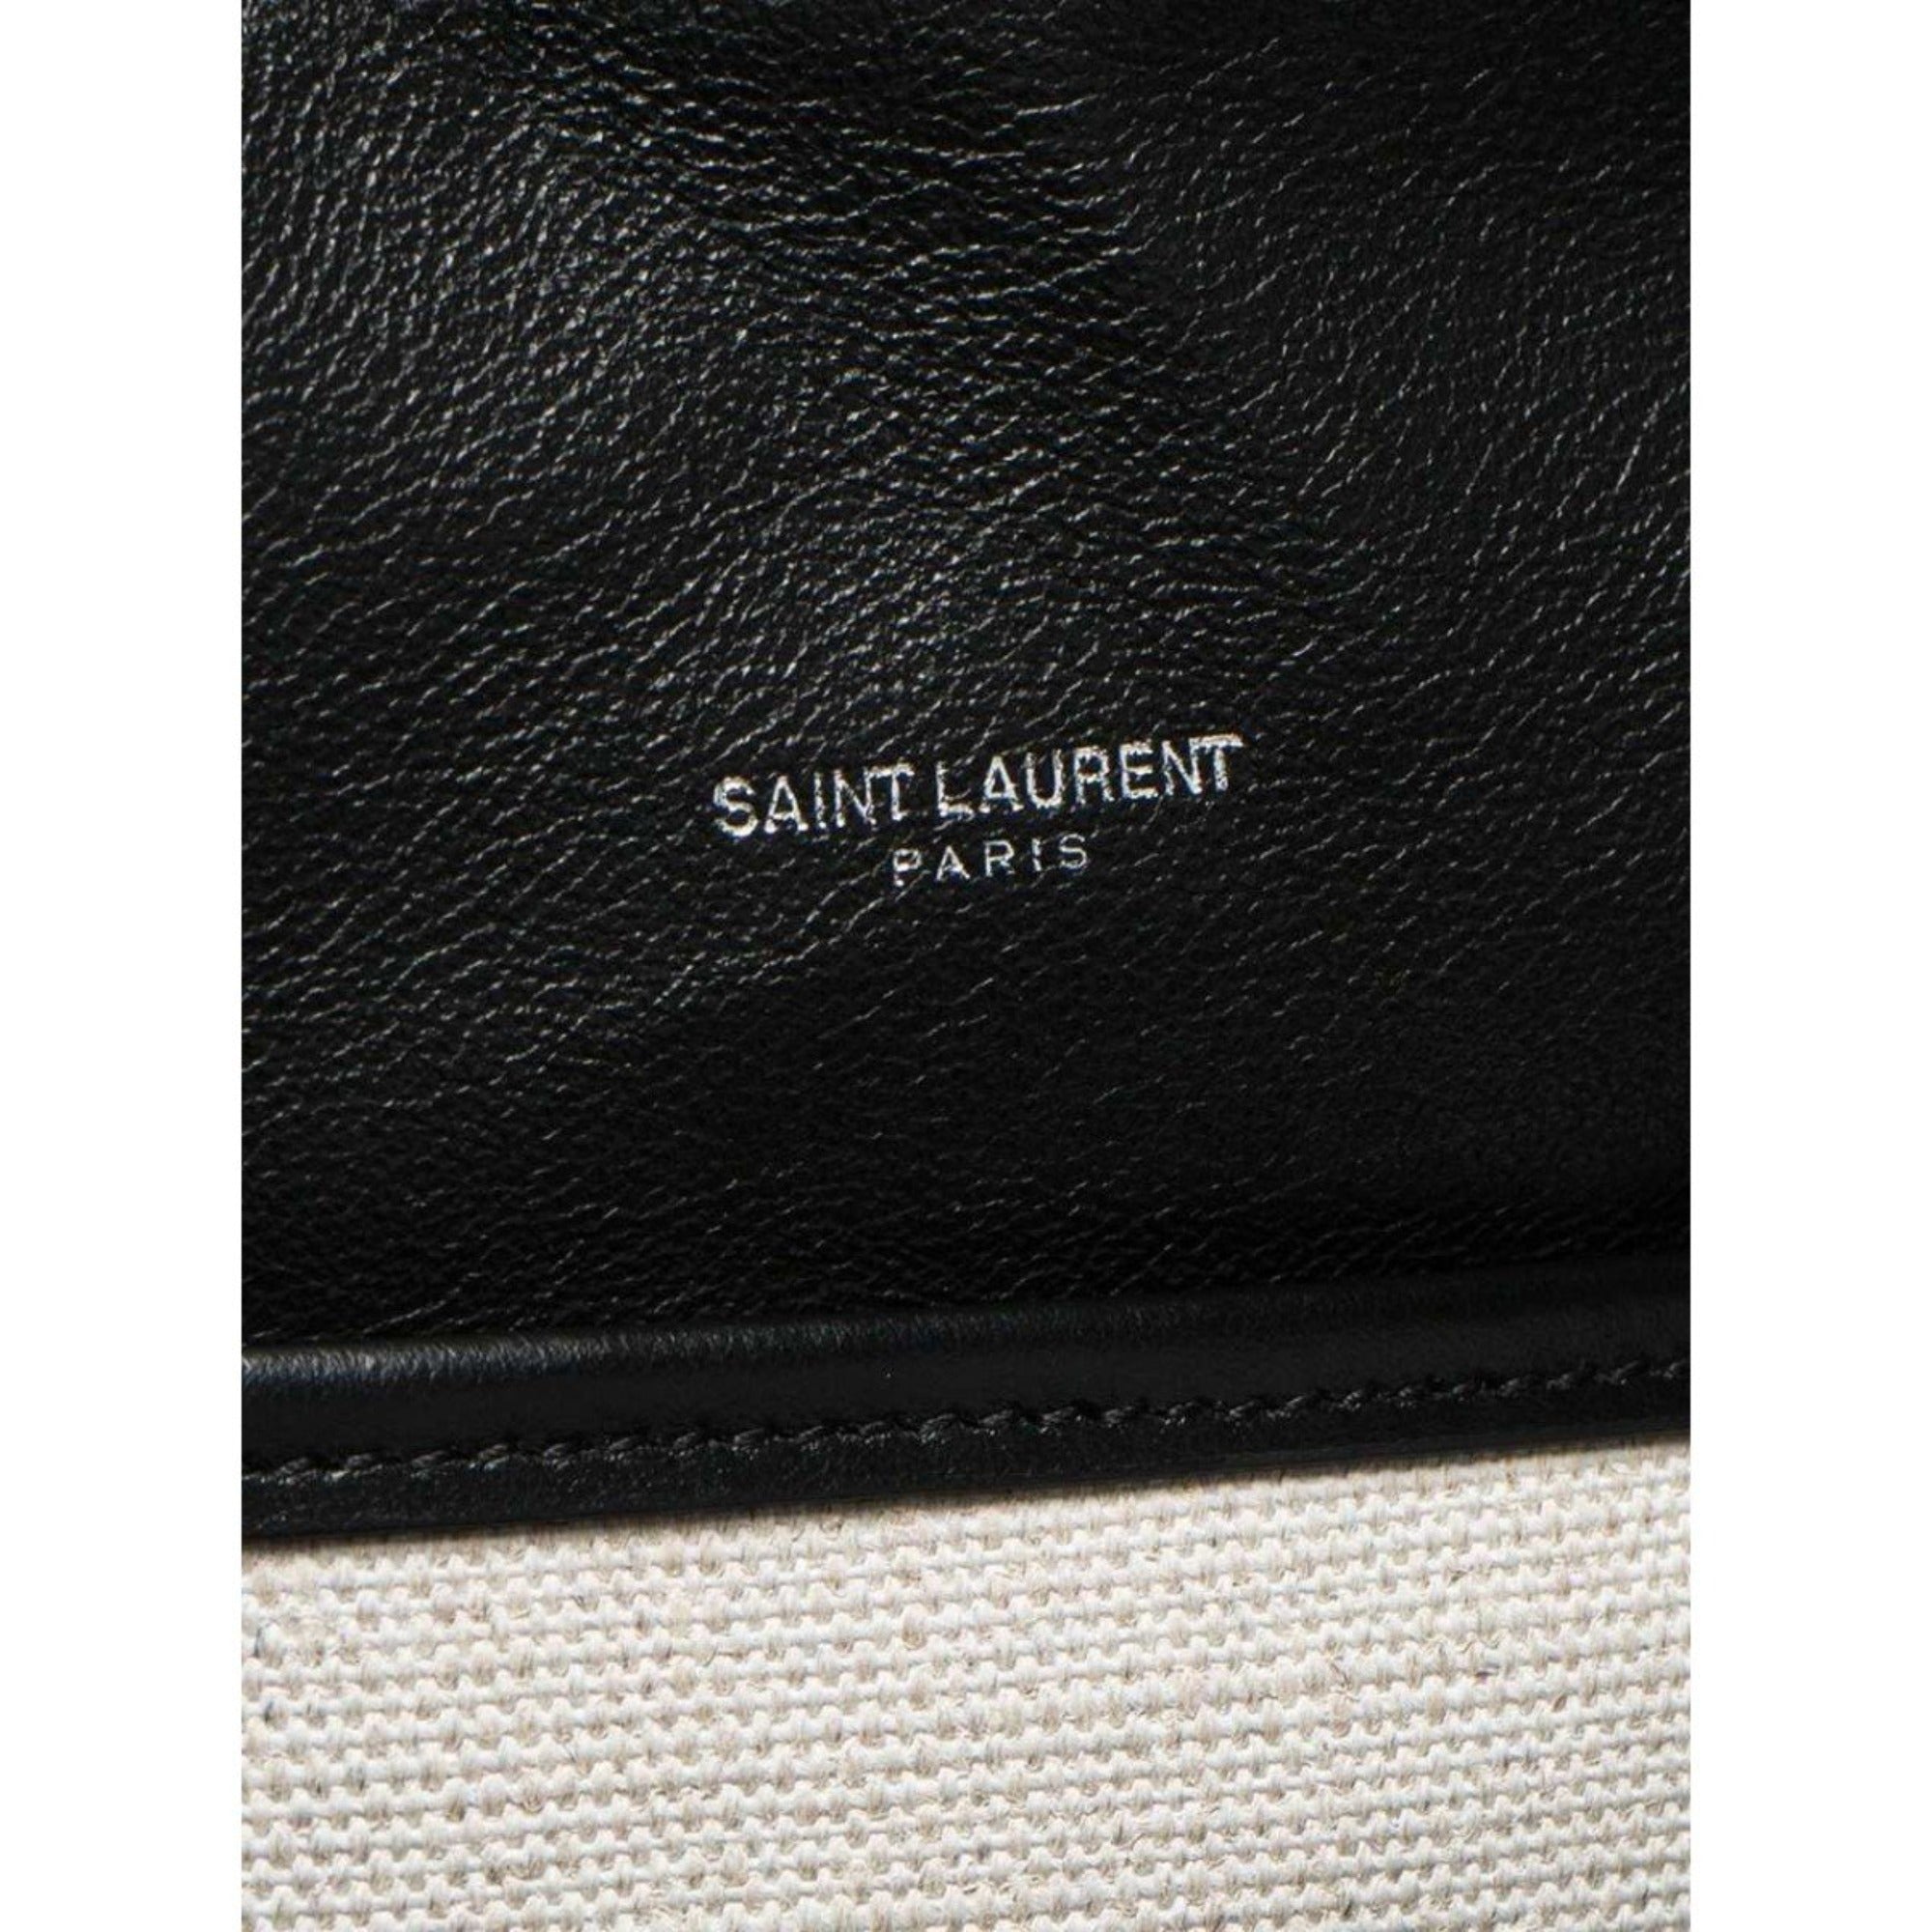 Saint Laurent Teddy White Canvas Drawstring Bucket Bag 551595 at_Queen_Bee_of_Beverly_Hills